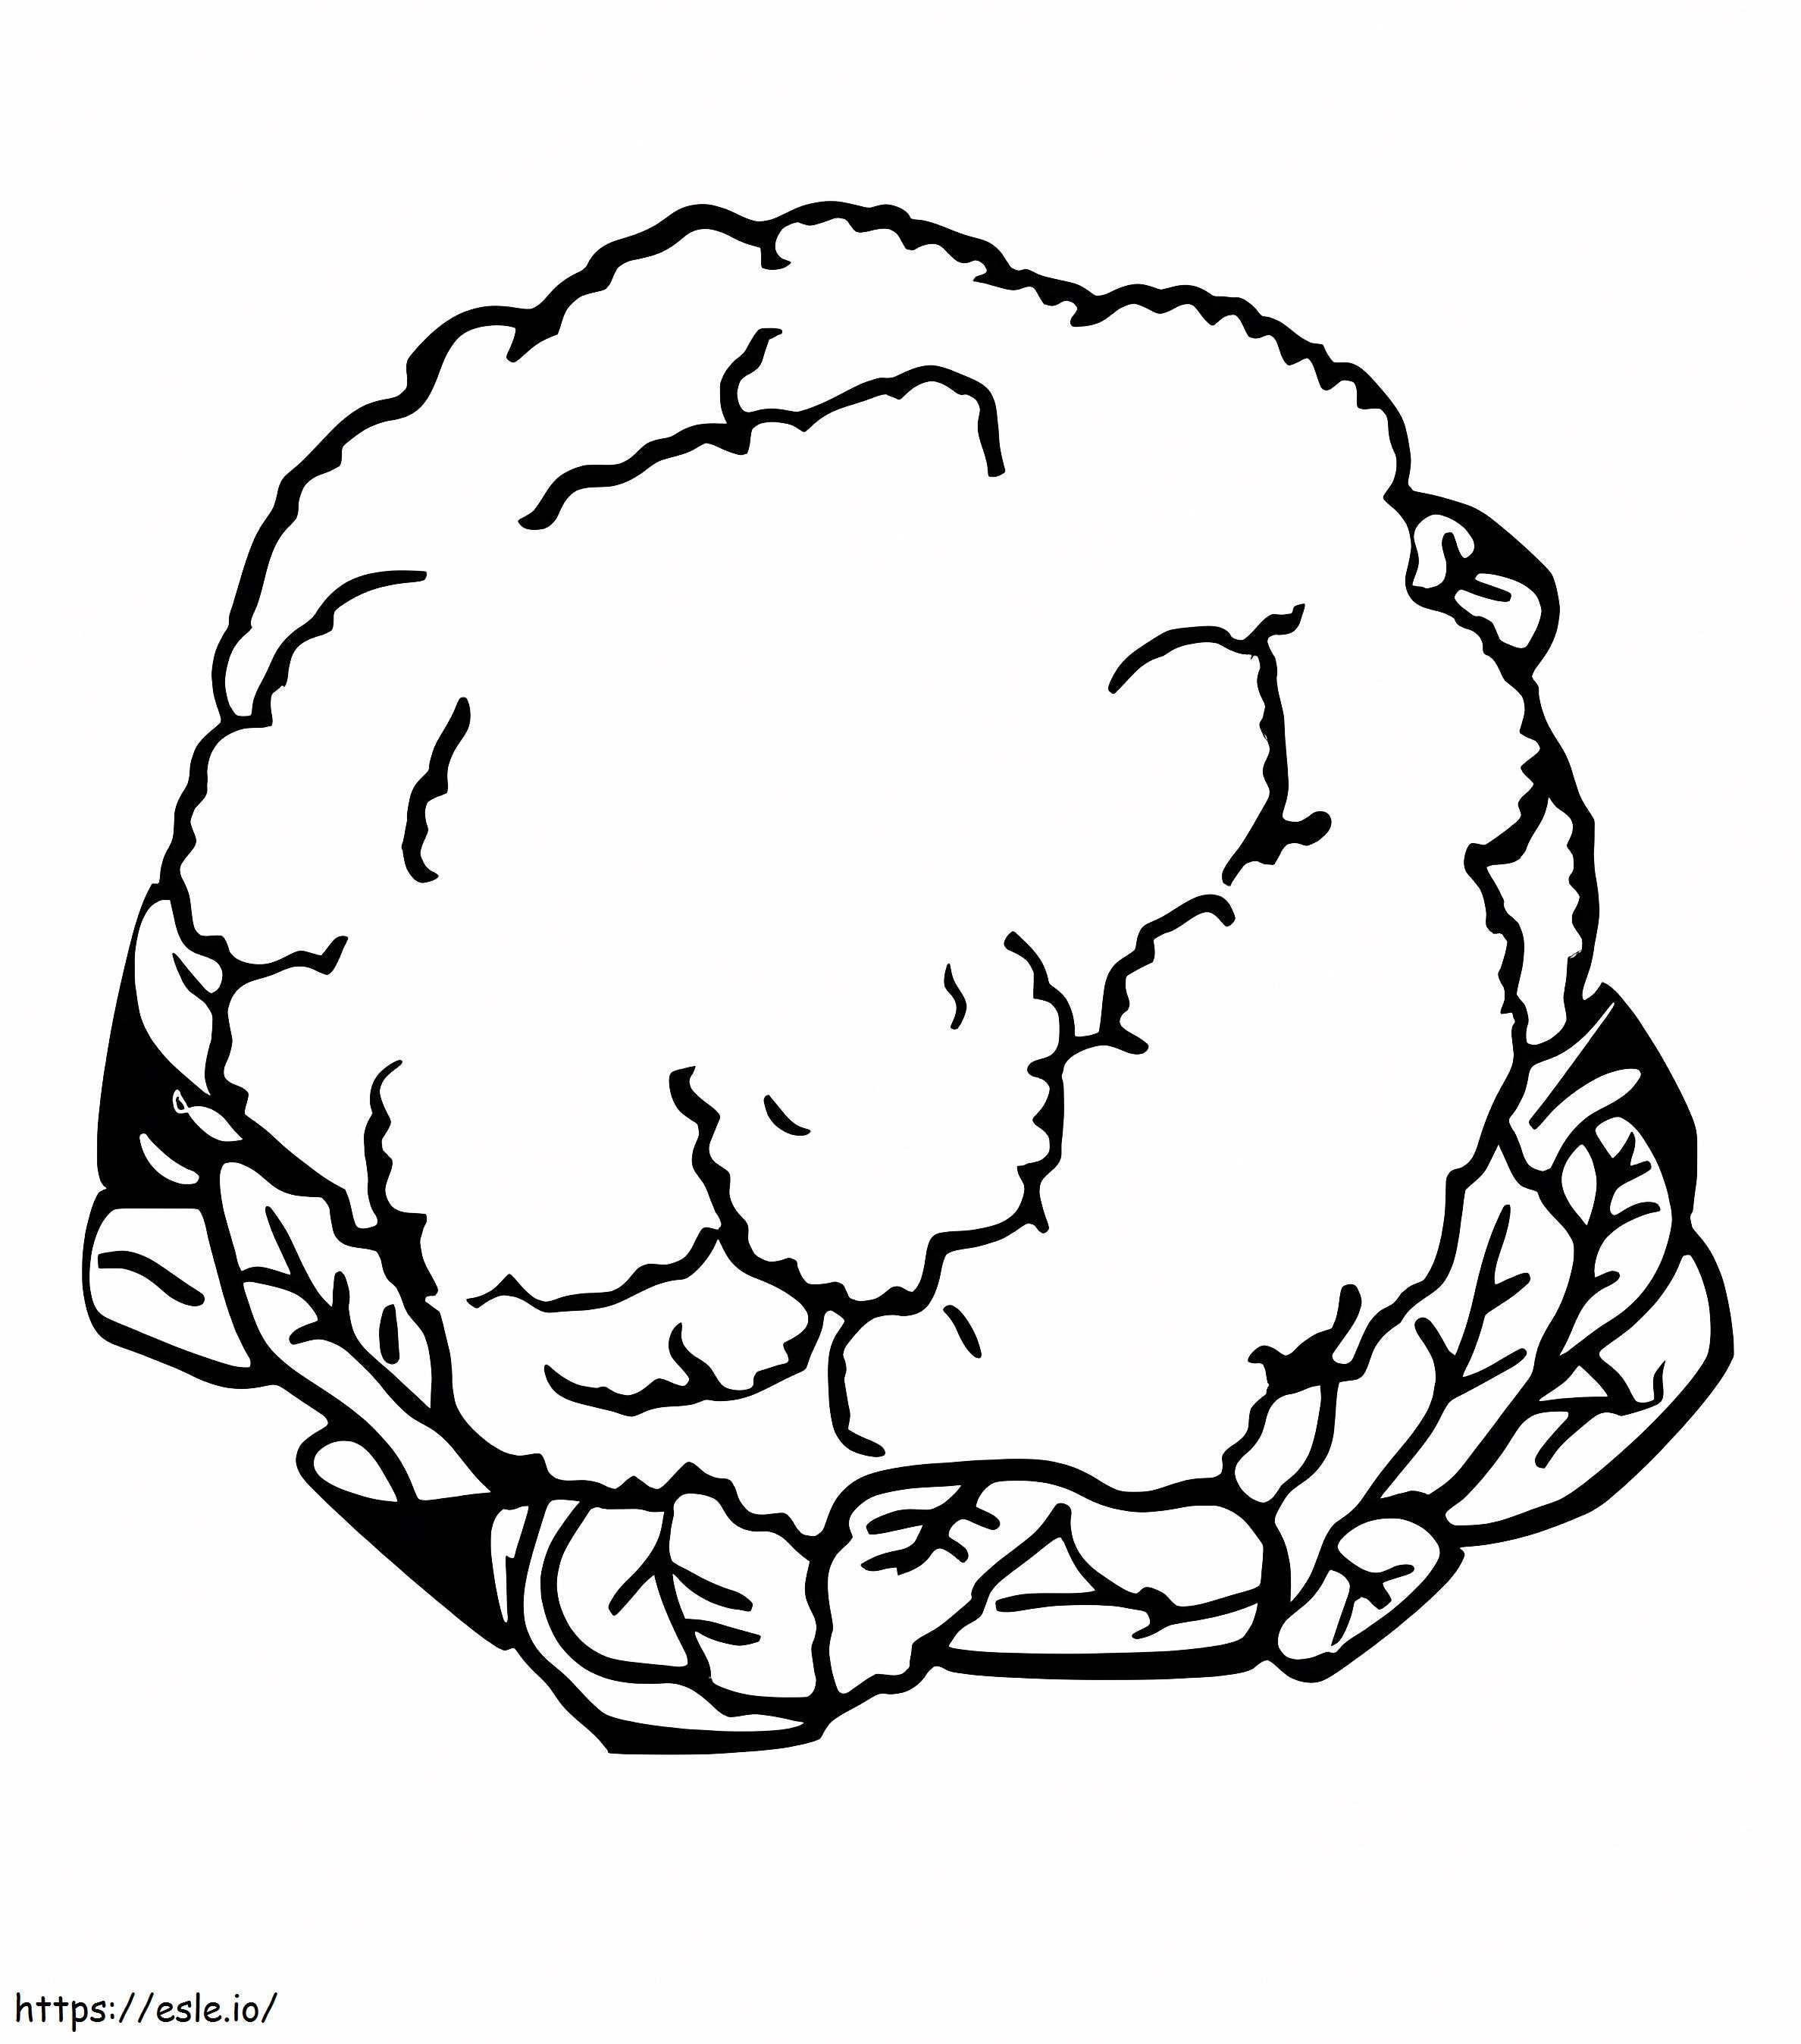 Cauliflower 3 coloring page